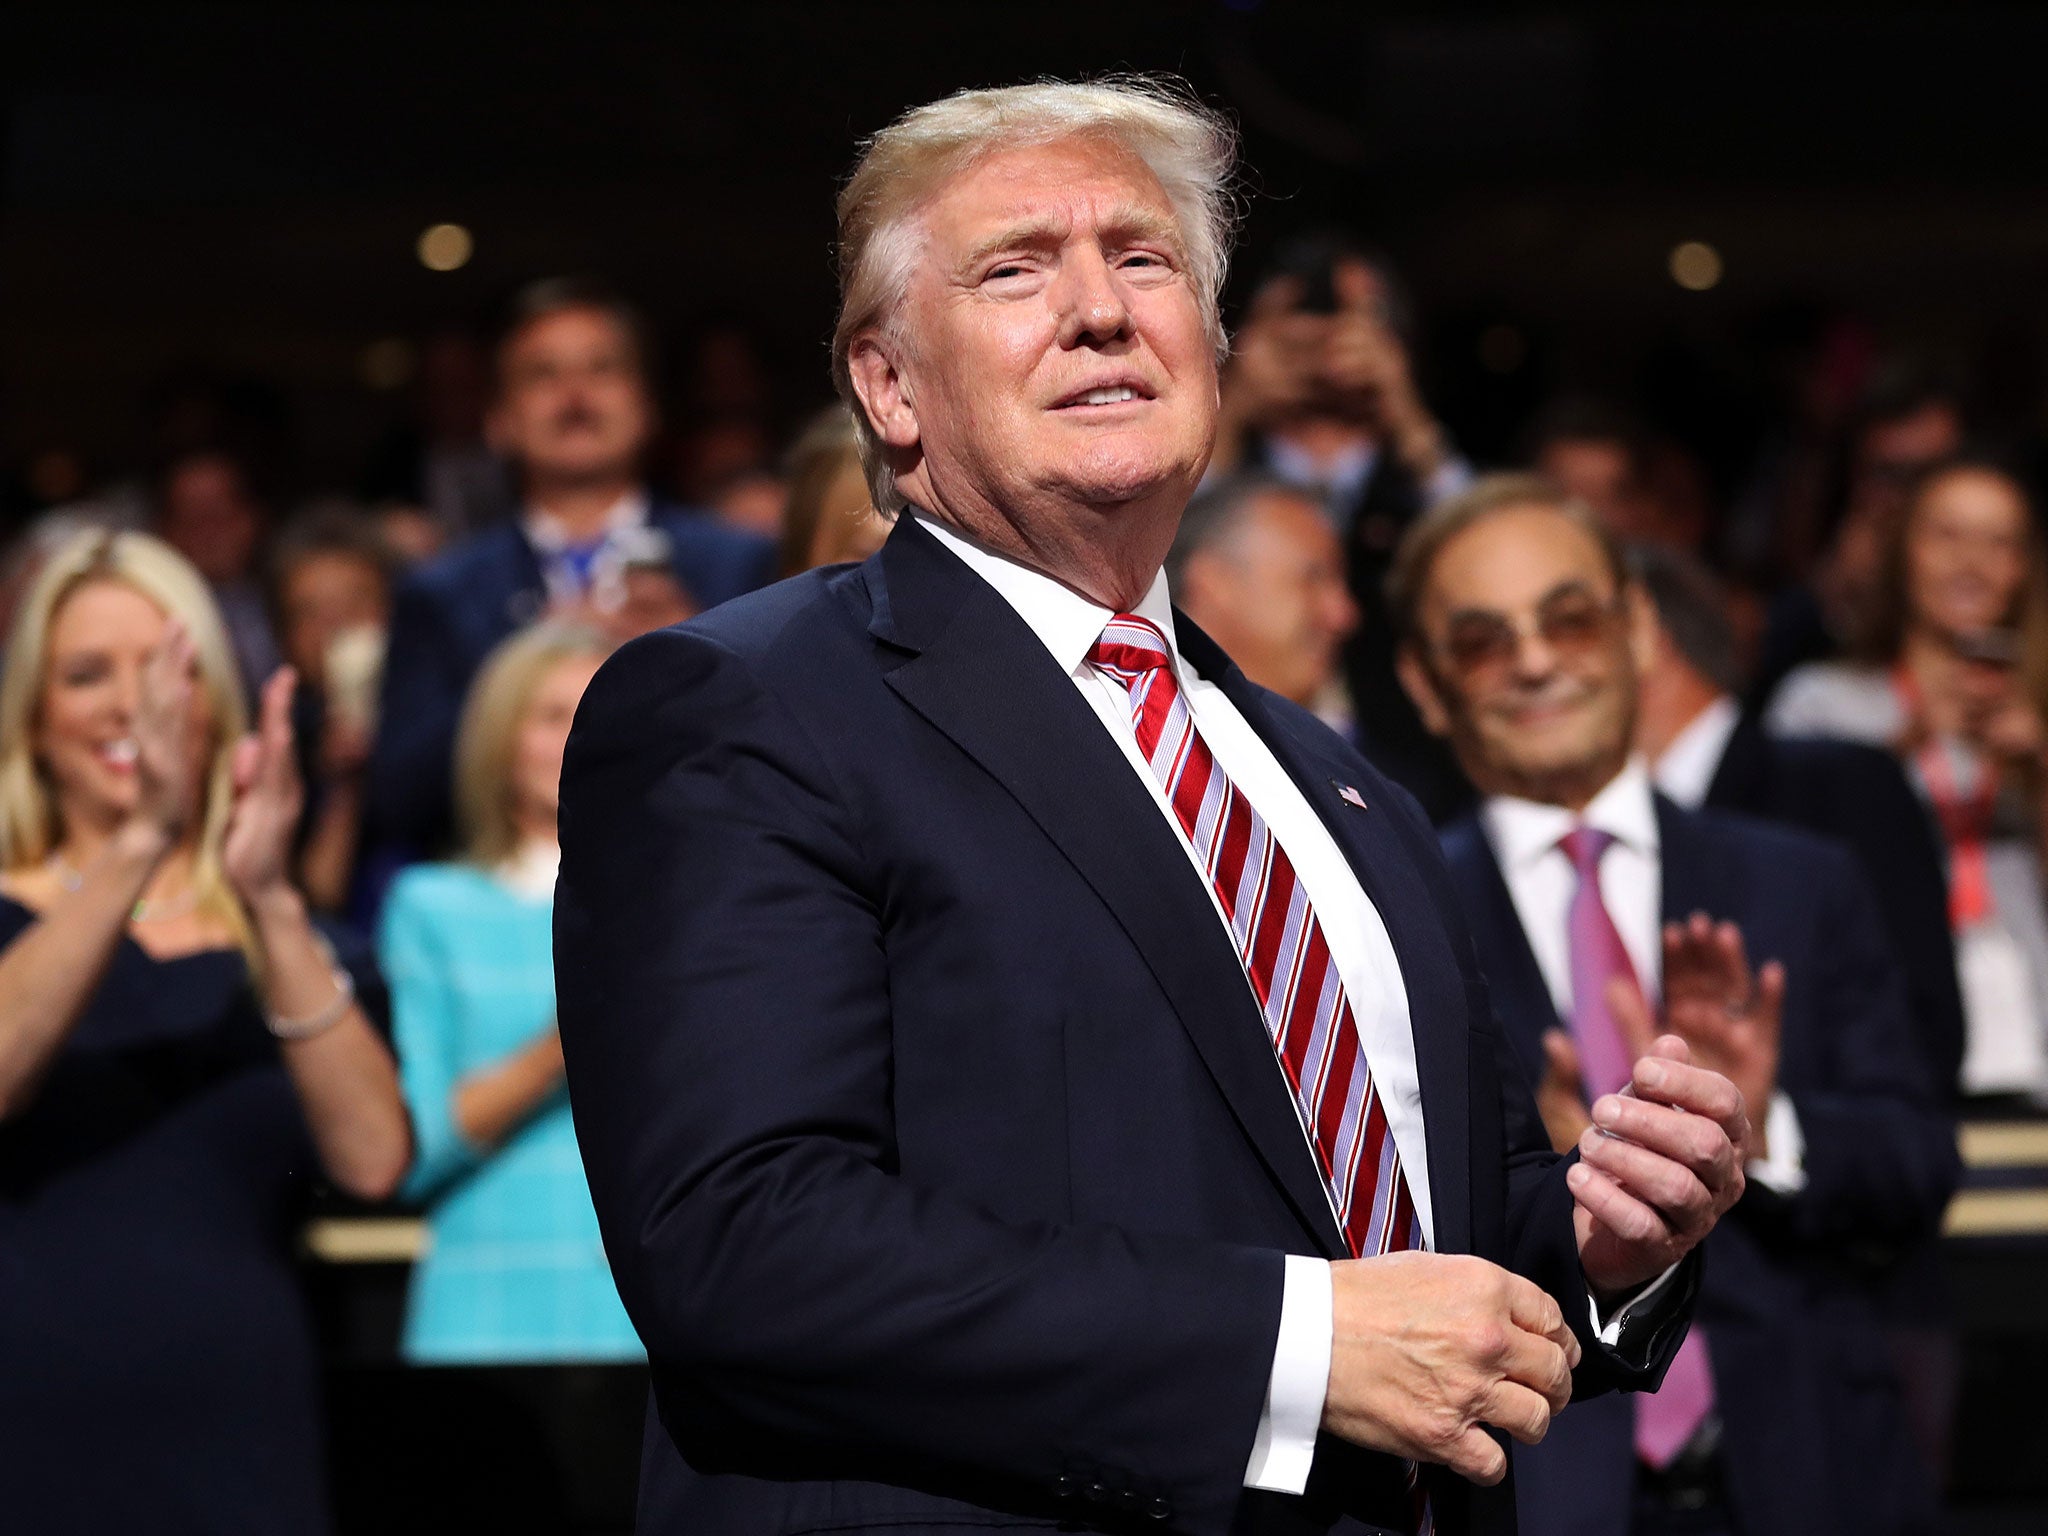 Republican presidential candidate Donald Trump attends the third day of the Republican National Convention on July 20, 2016 at the Quicken Loans Arena in Cleveland, Ohio